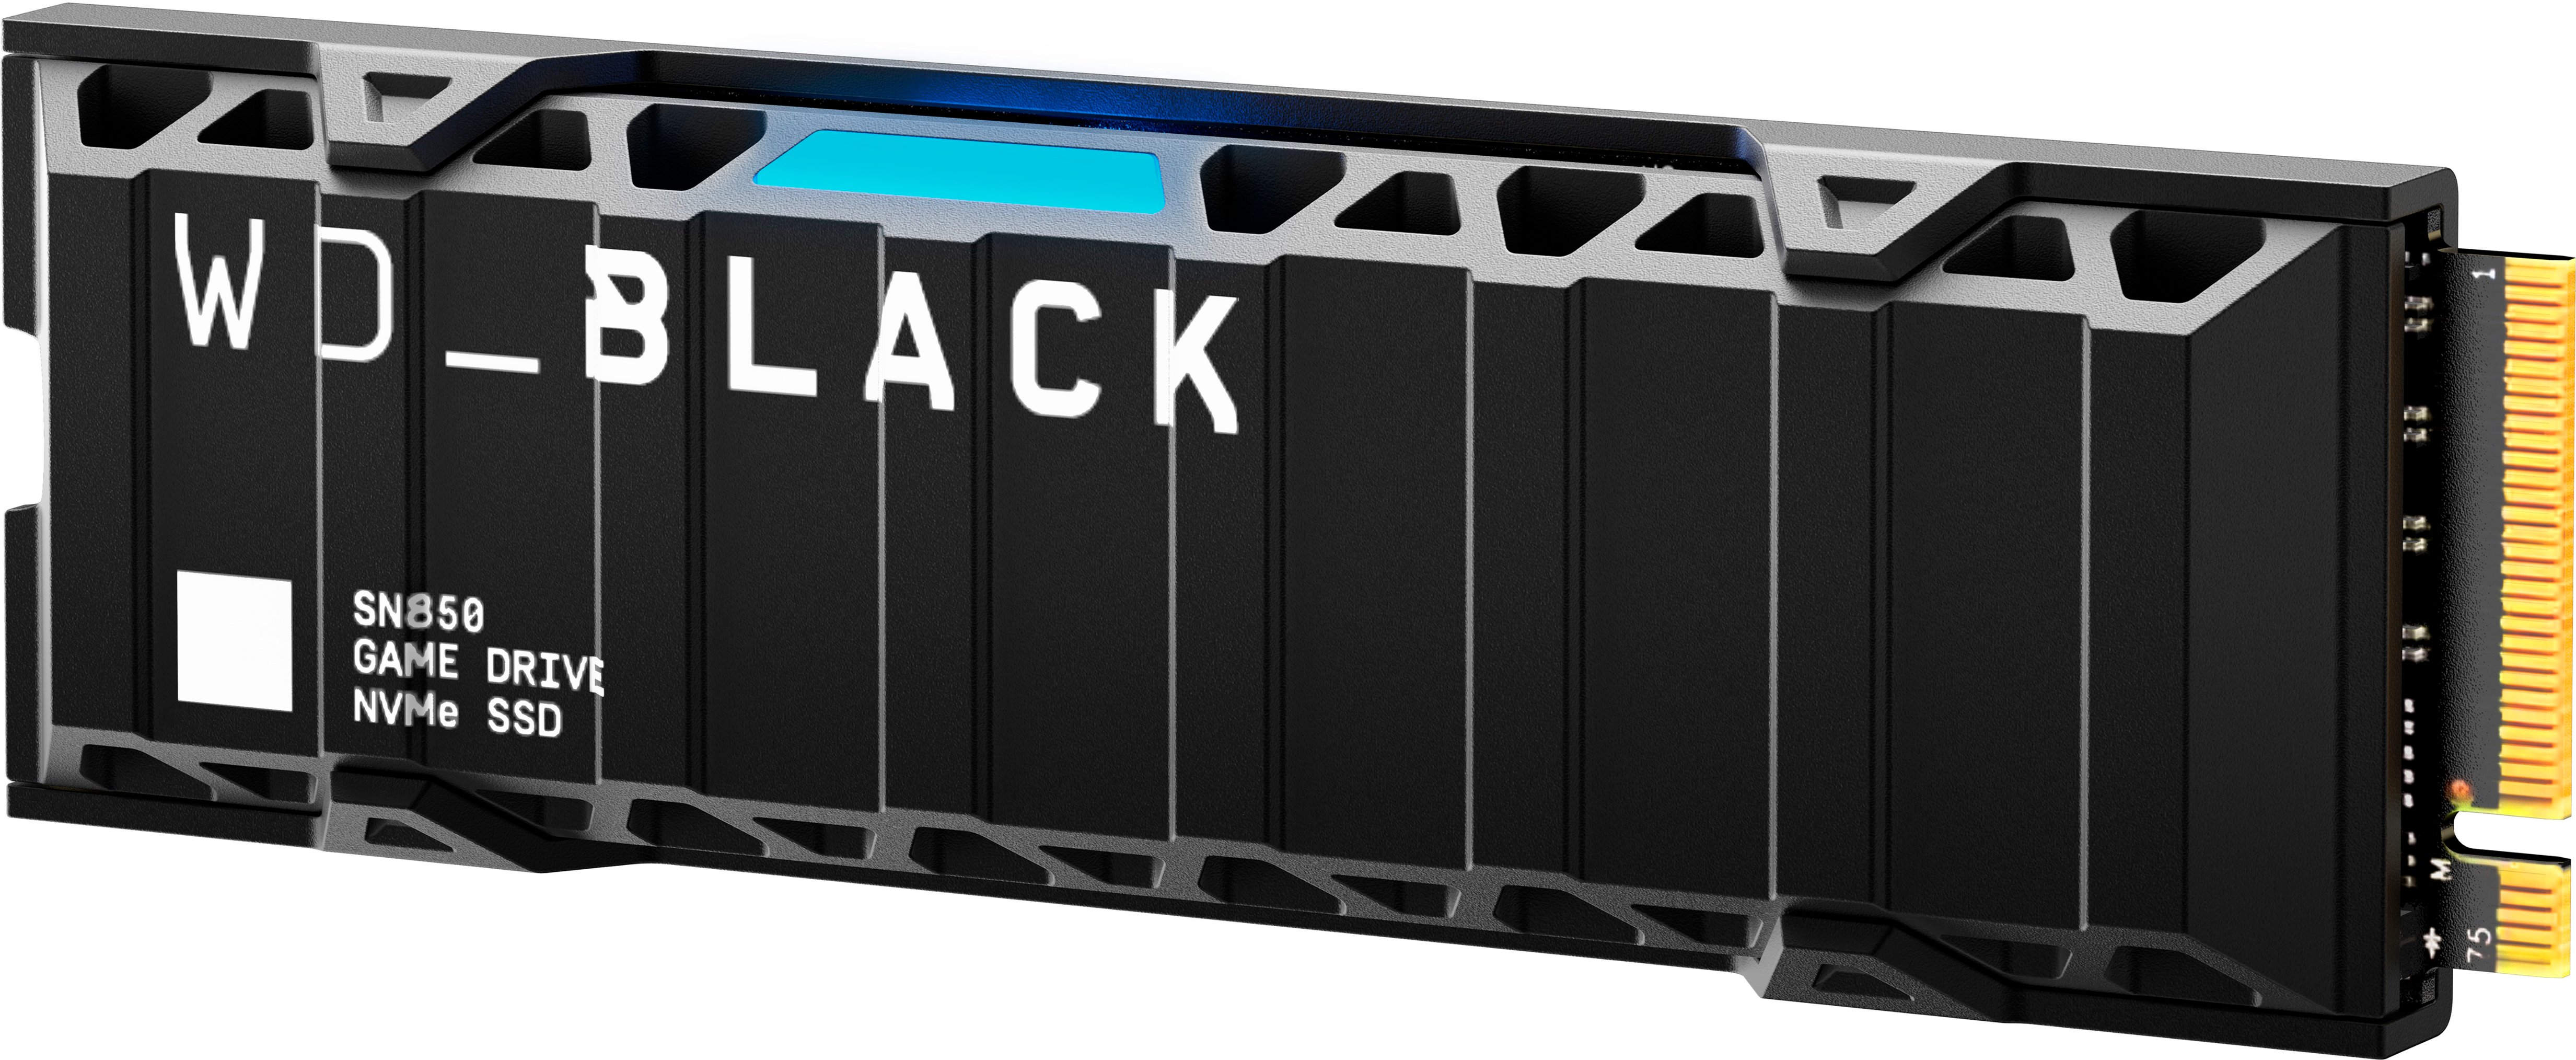 WD_BLACK 1TB SN850 NVMe SSD for PS5 Consoles Solid State Drive with  Heatsink - Gen4 PCIe, M.2 2280, Up to 7,000 MB/s - WDBBKW0010BBK-WRSN 